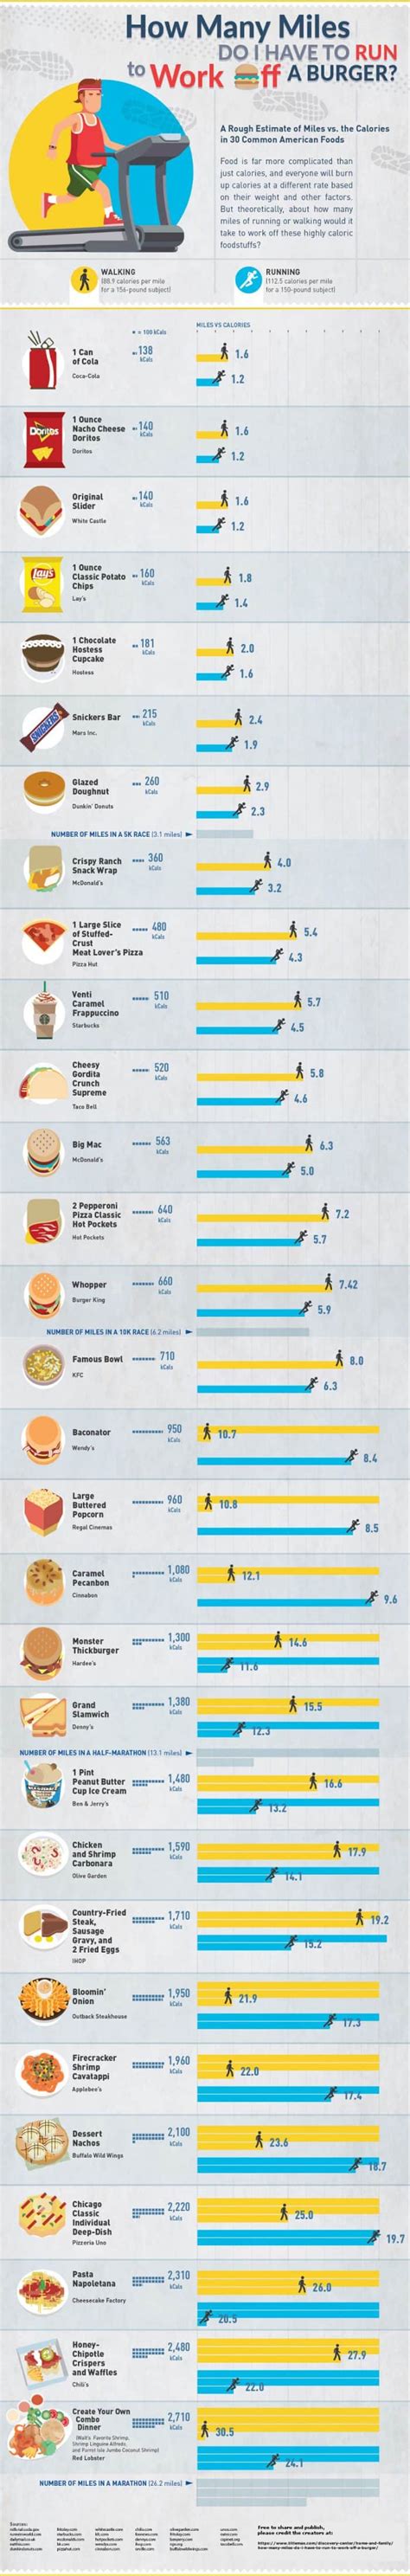 here s what it takes to burn off the calories in junk food daily infographic